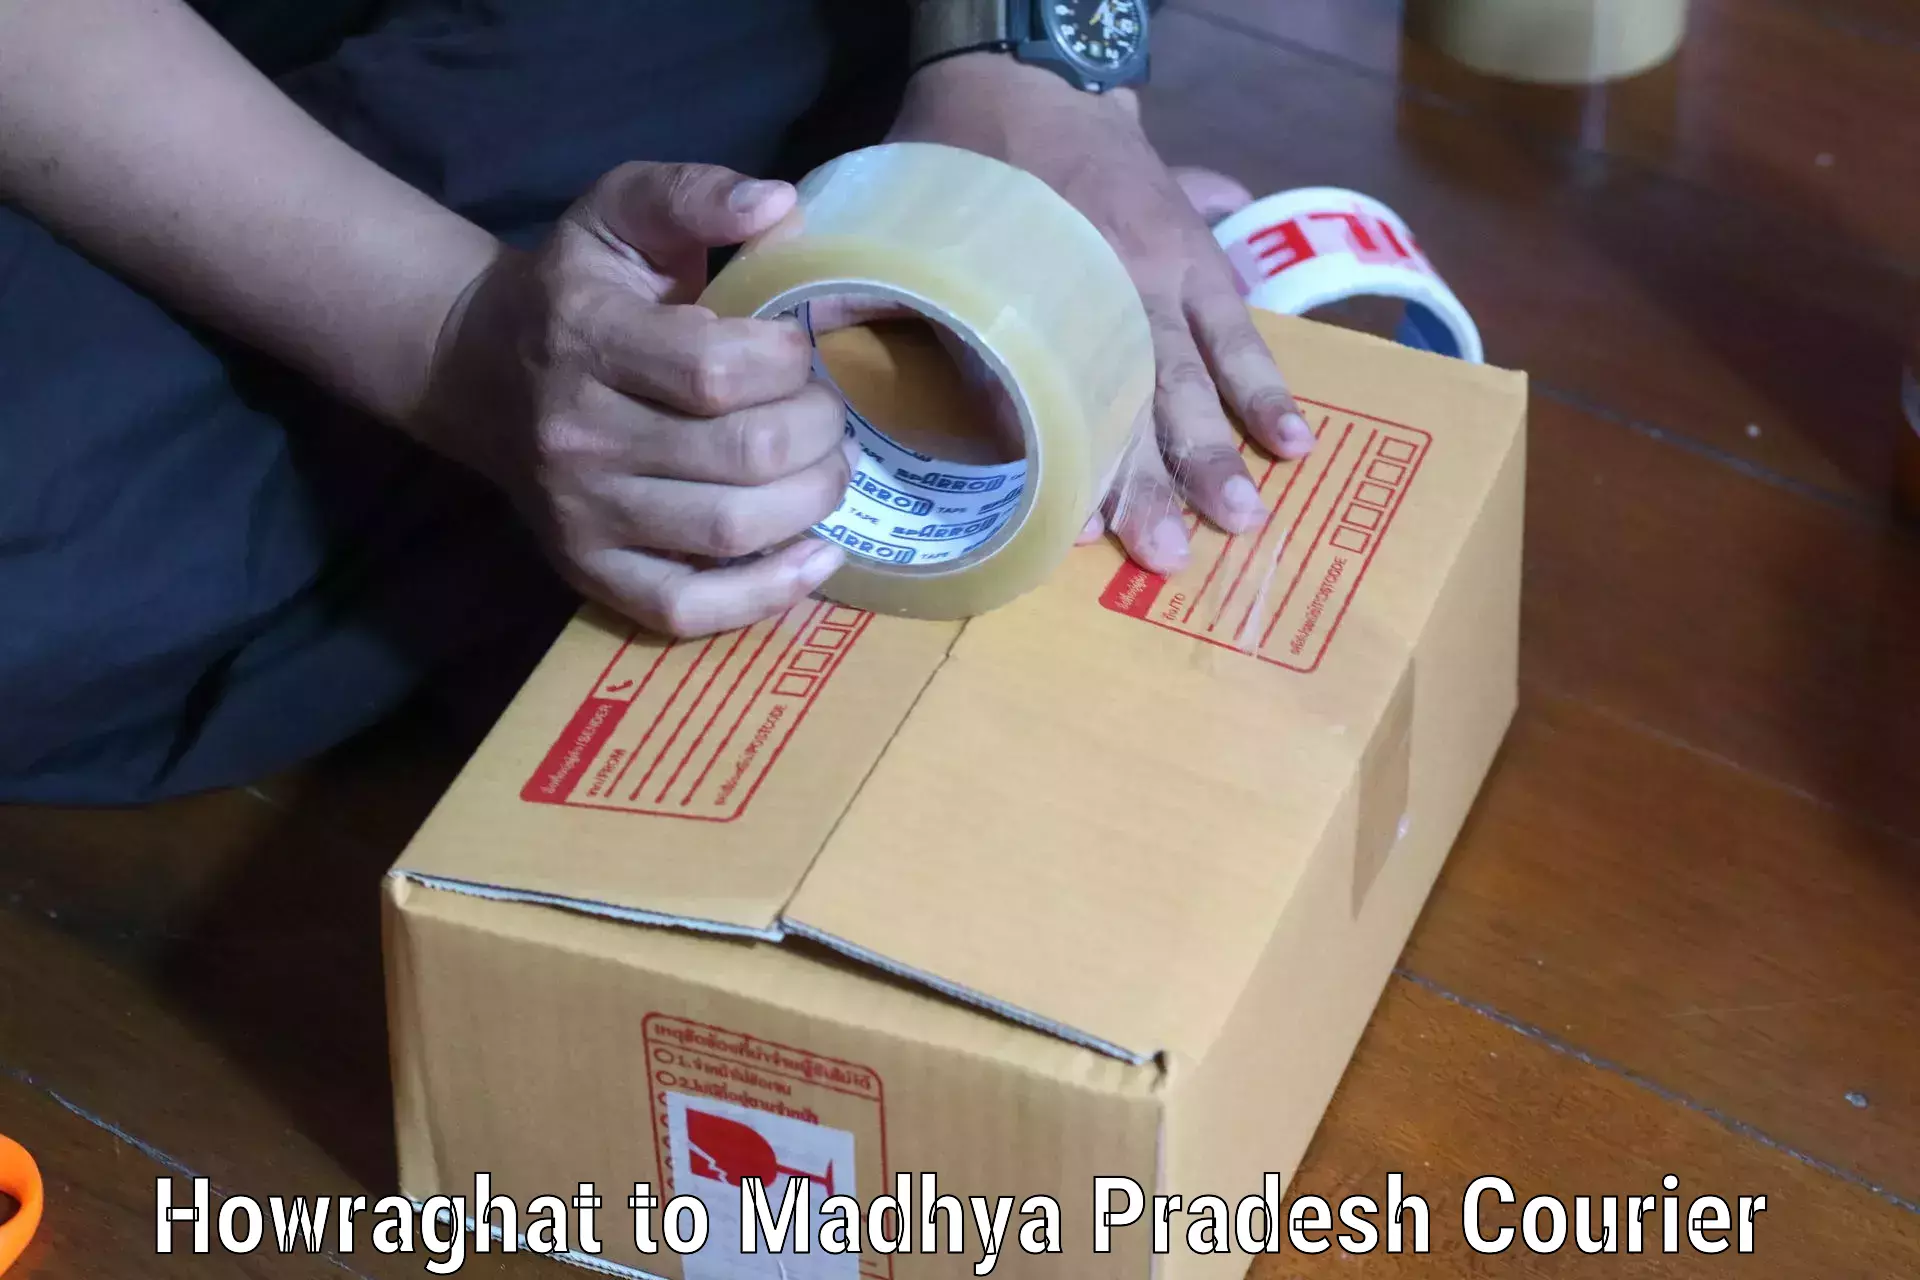 24-hour courier services Howraghat to Raipur Karchuliyan